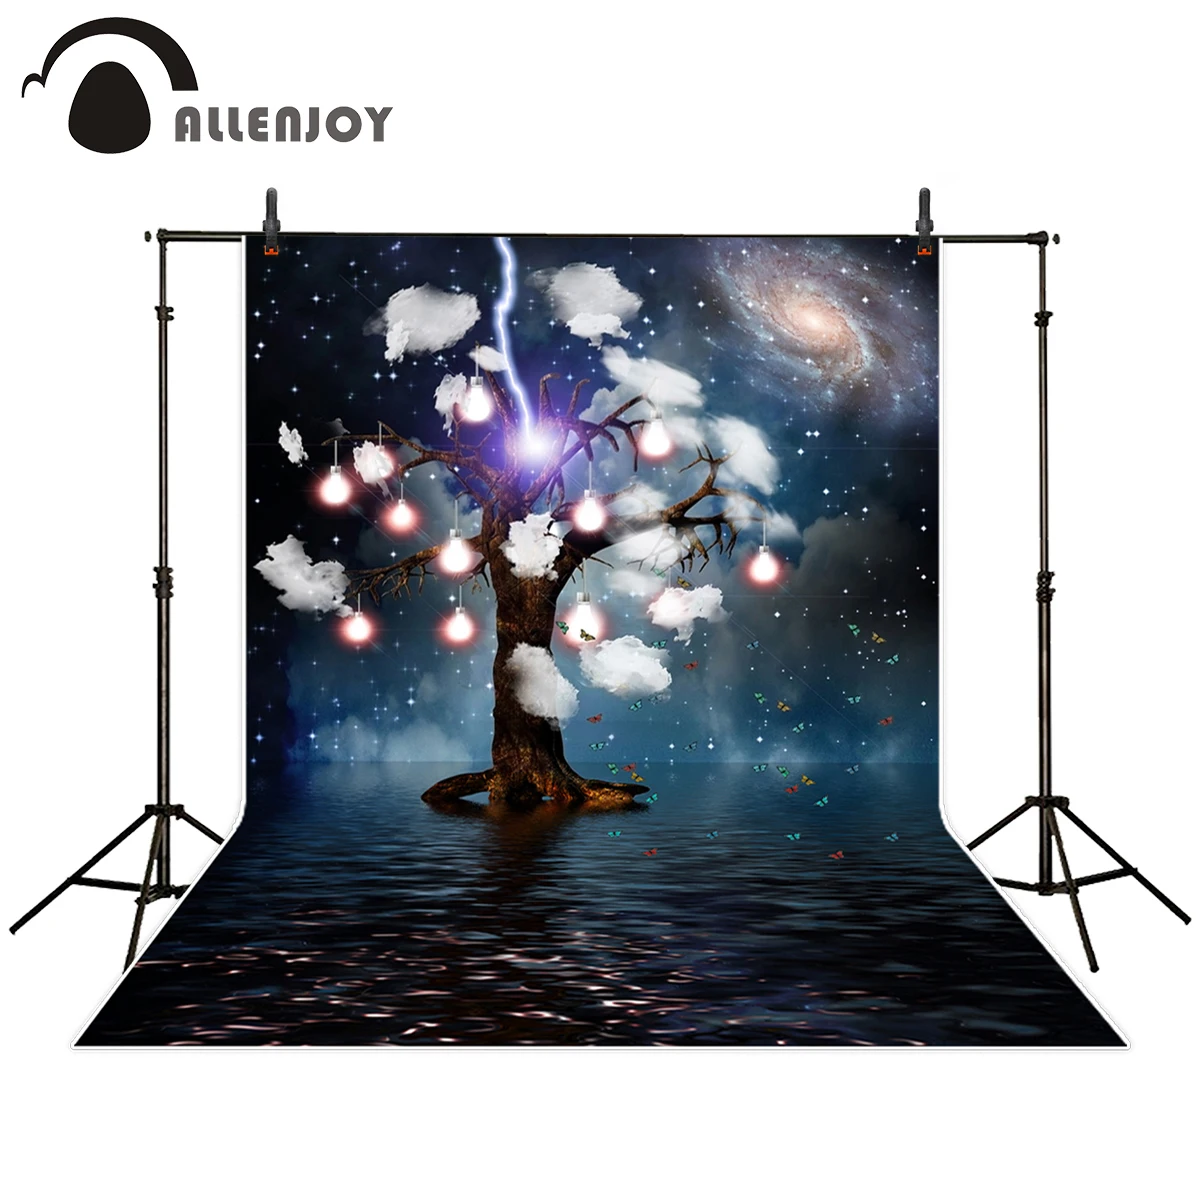 Allenjoy photography backdrop dreamy Star night clouds